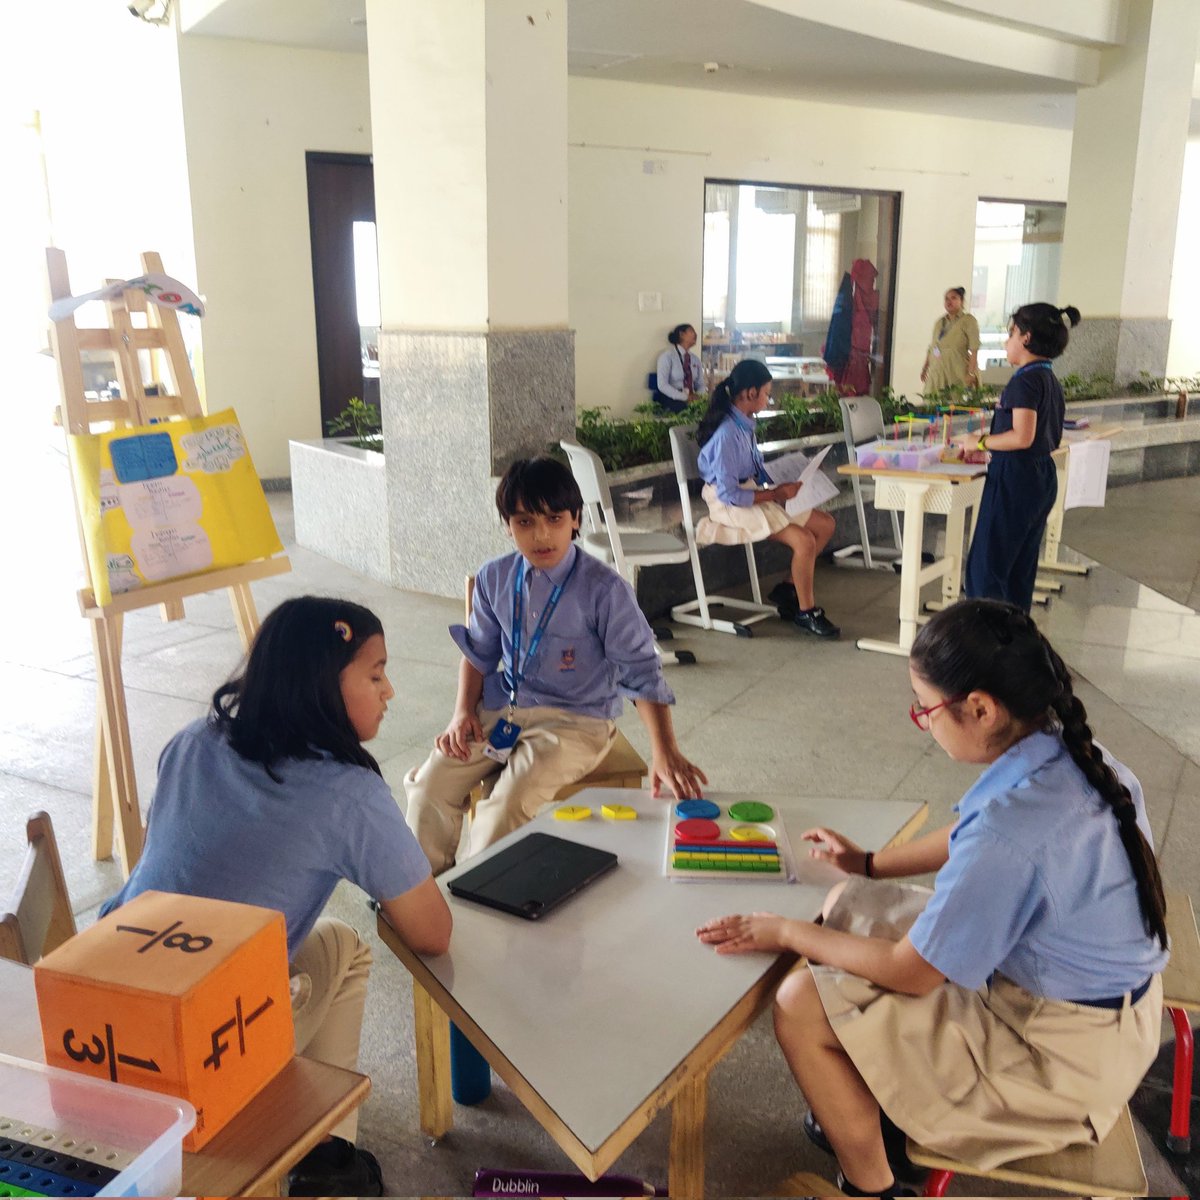 Learners culminated year long #math learning #math workshop #engaging # led by students #differentiated learning #conceptual understanding #skills #knowledge #challenging # visual articulation #math manipulative @Prometheus_Edu @ibpyp @ketaki @aanchalshah16 @AneeshaSahni